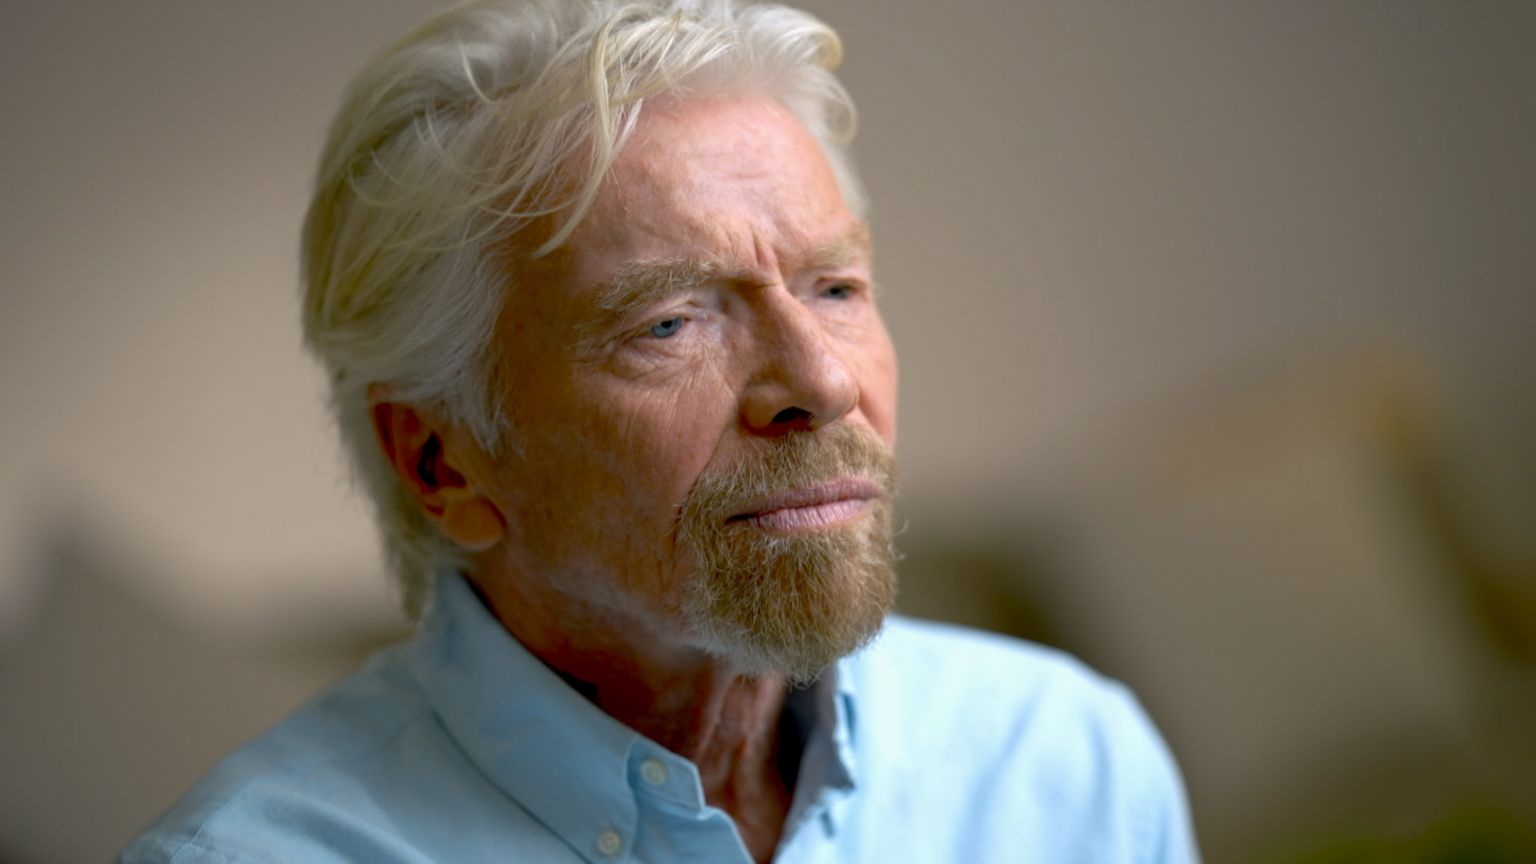 Sir Richard Branson has been in business for more than 50 years and run several hundred companies